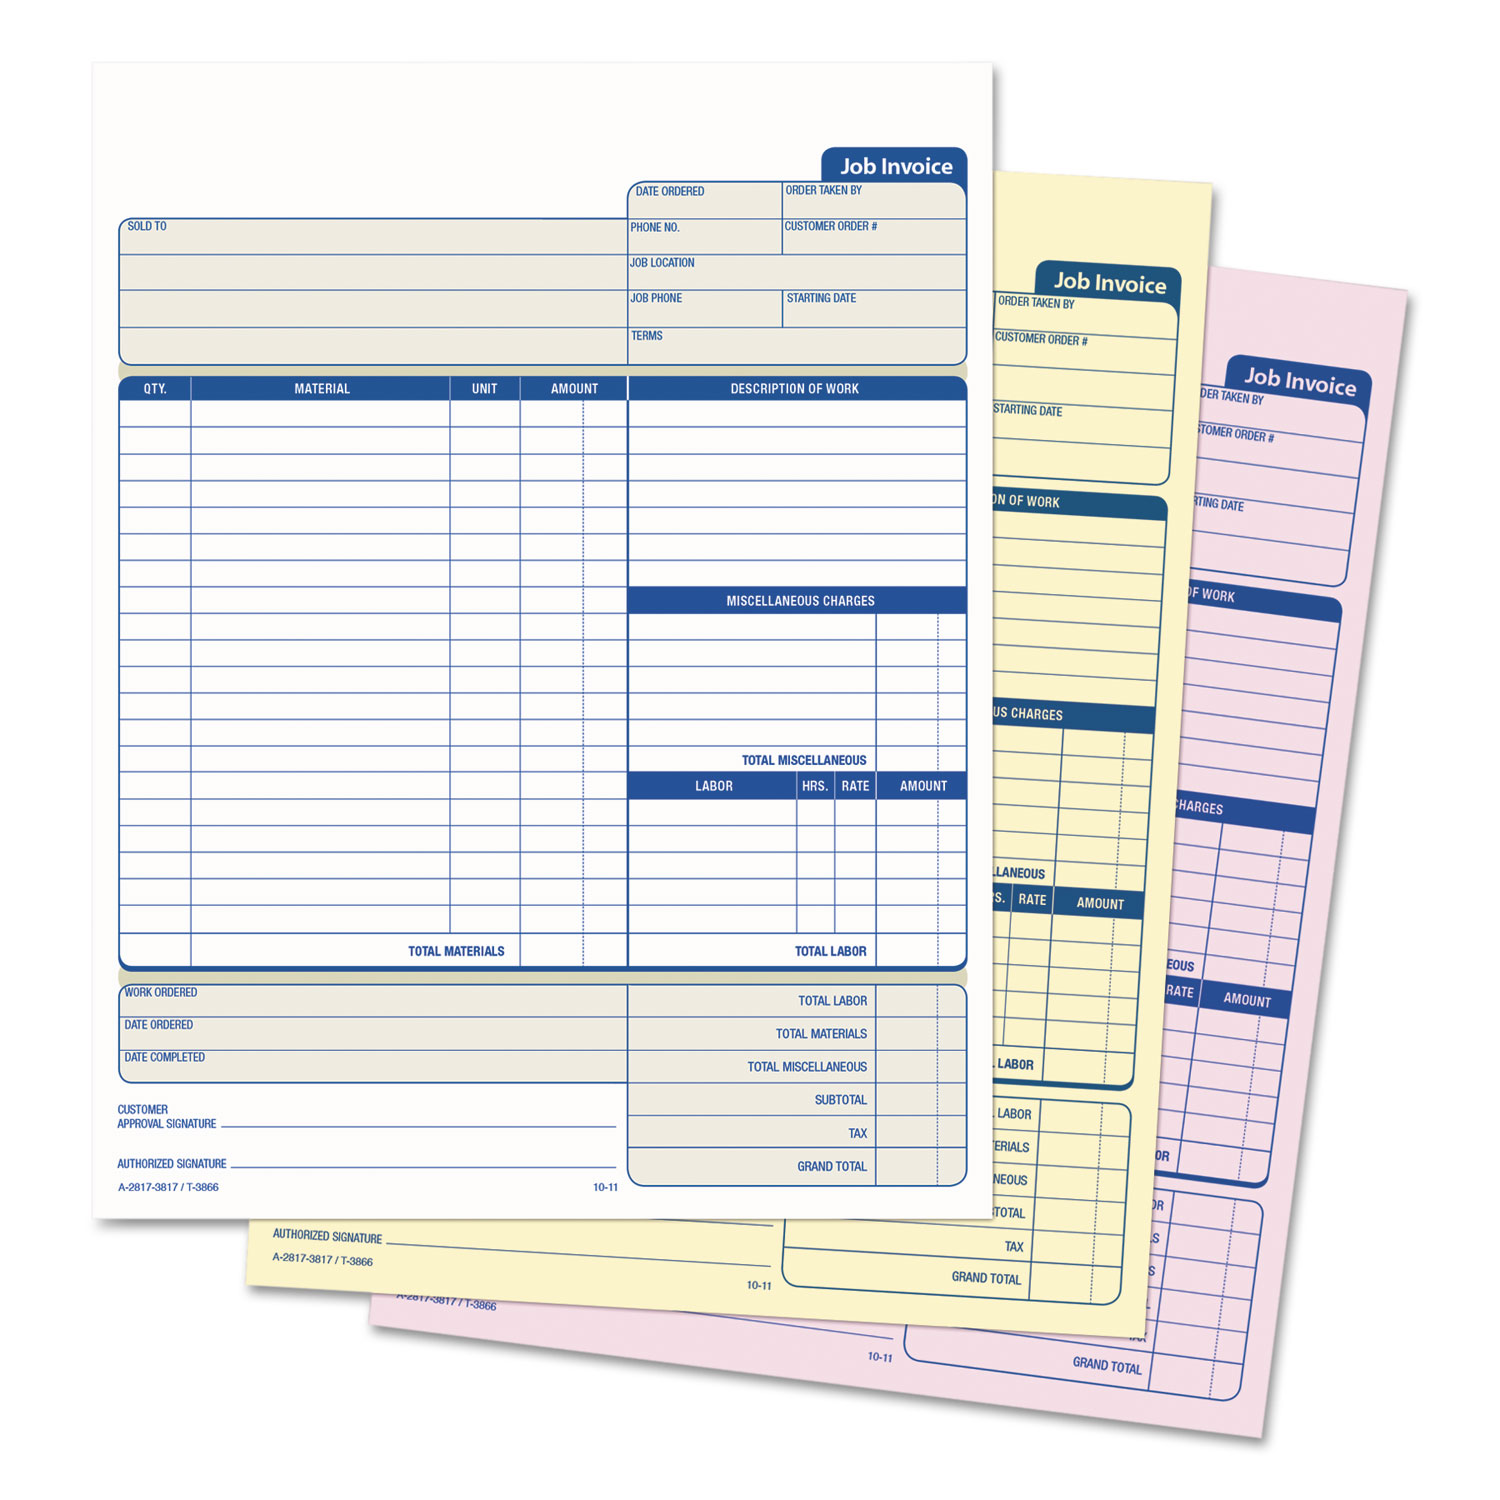 Snap Off Job Invoice Form by TOPS™ TOP3866 | OnTimeSupplies.com